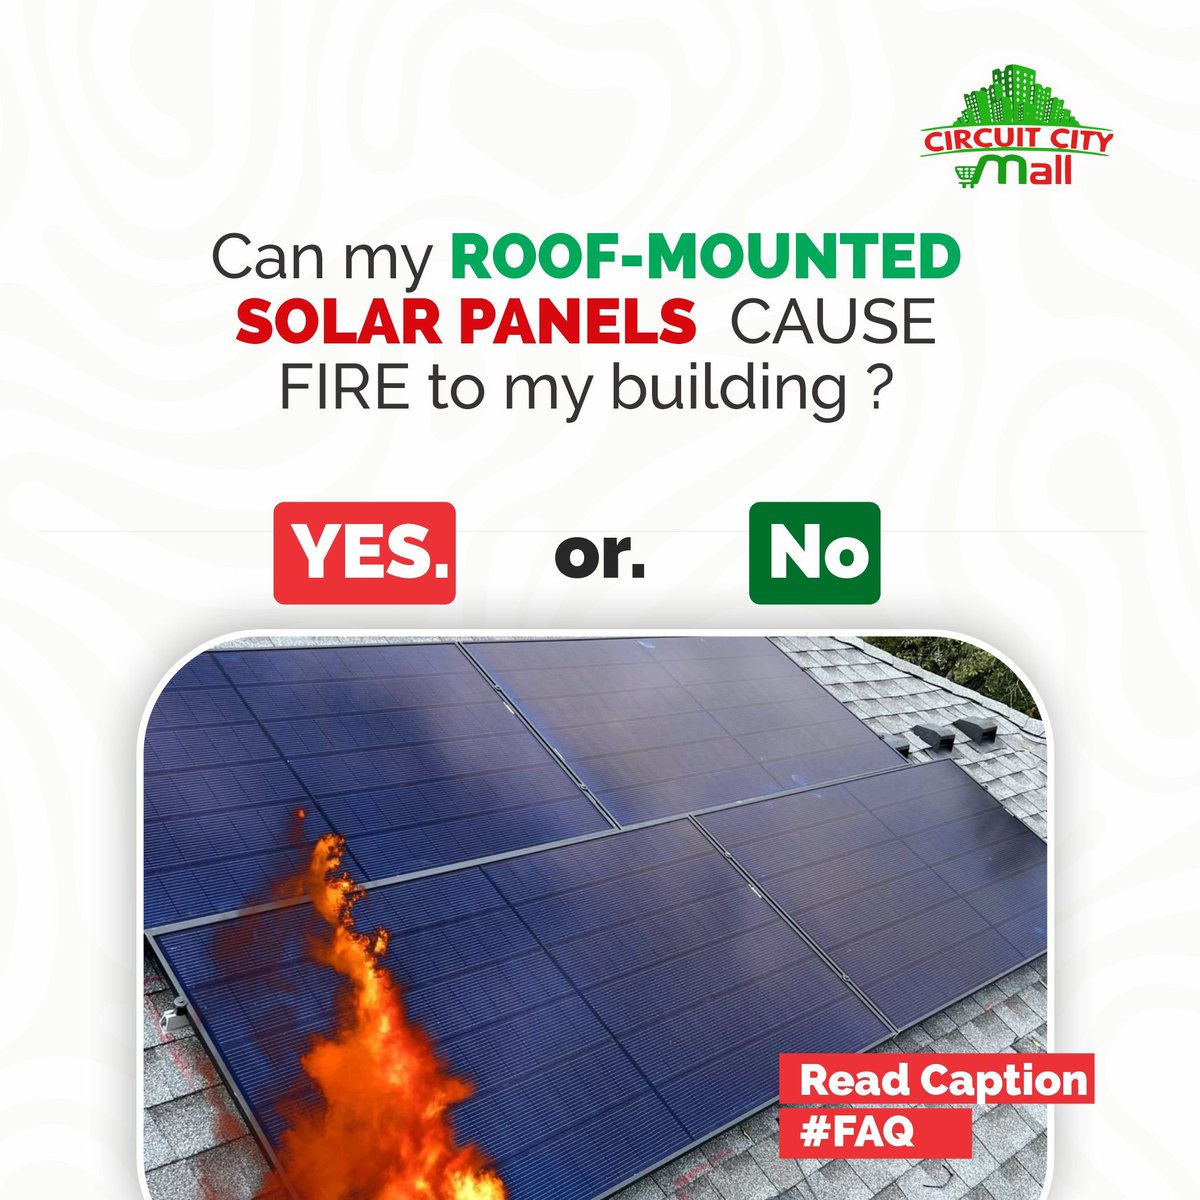 Can my ROOF-MOUNTED SOLAR PANELS CAUSE A FIRE? 🔥
Recently,  shopping plaza in Abuja caught fire from flames from its rooftop solarpanel.
 
This incident has  sparked concerns about solar panel safety, but what's the real story? 🏢

#CircuitCitySolarSafety #GreenEnergyRevolution